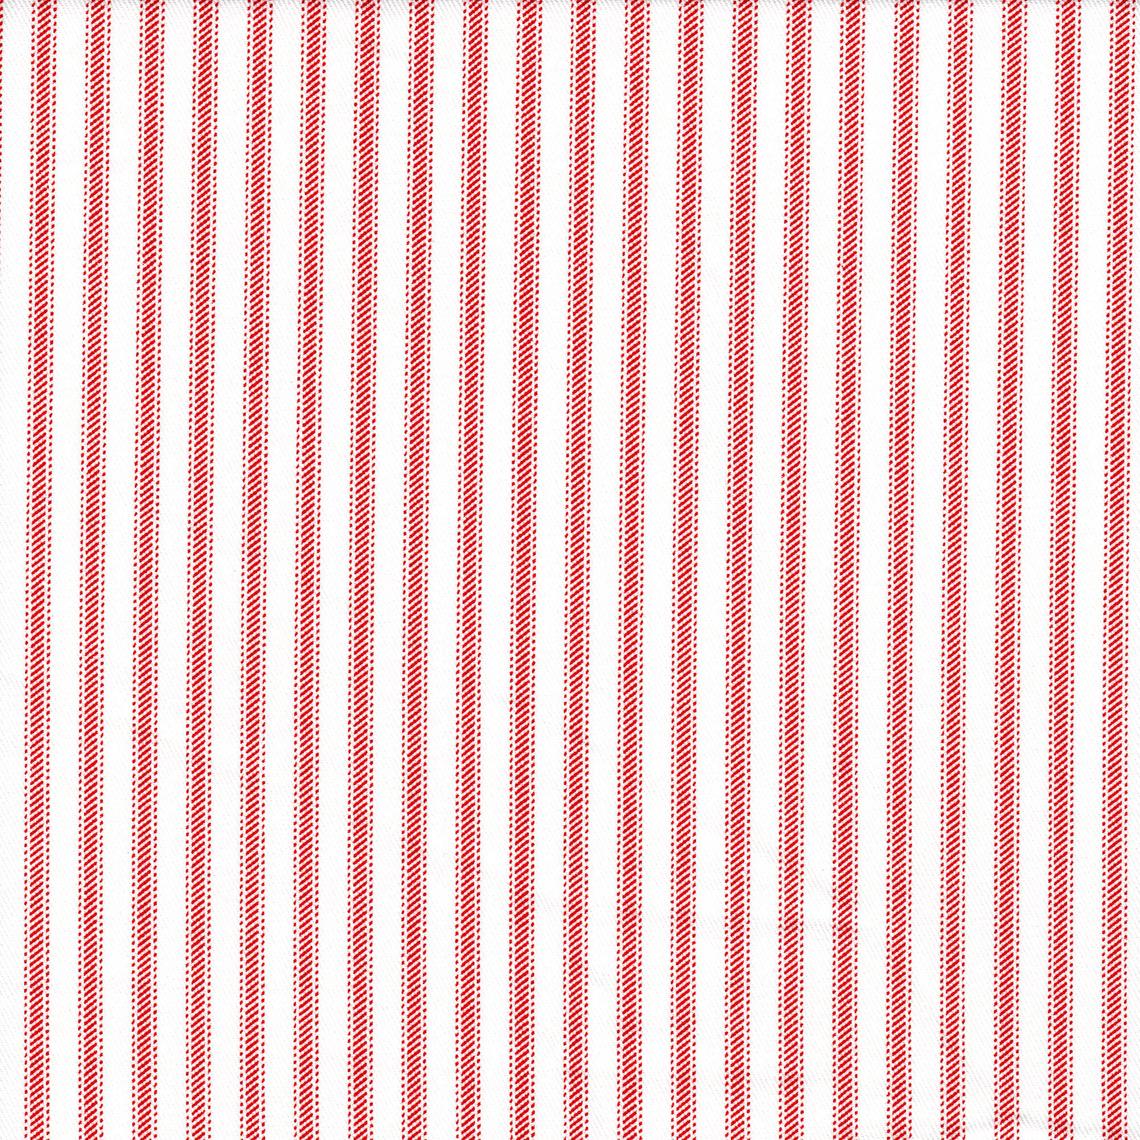 tailored bedskirt in classic lipstick red ticking stripe on white